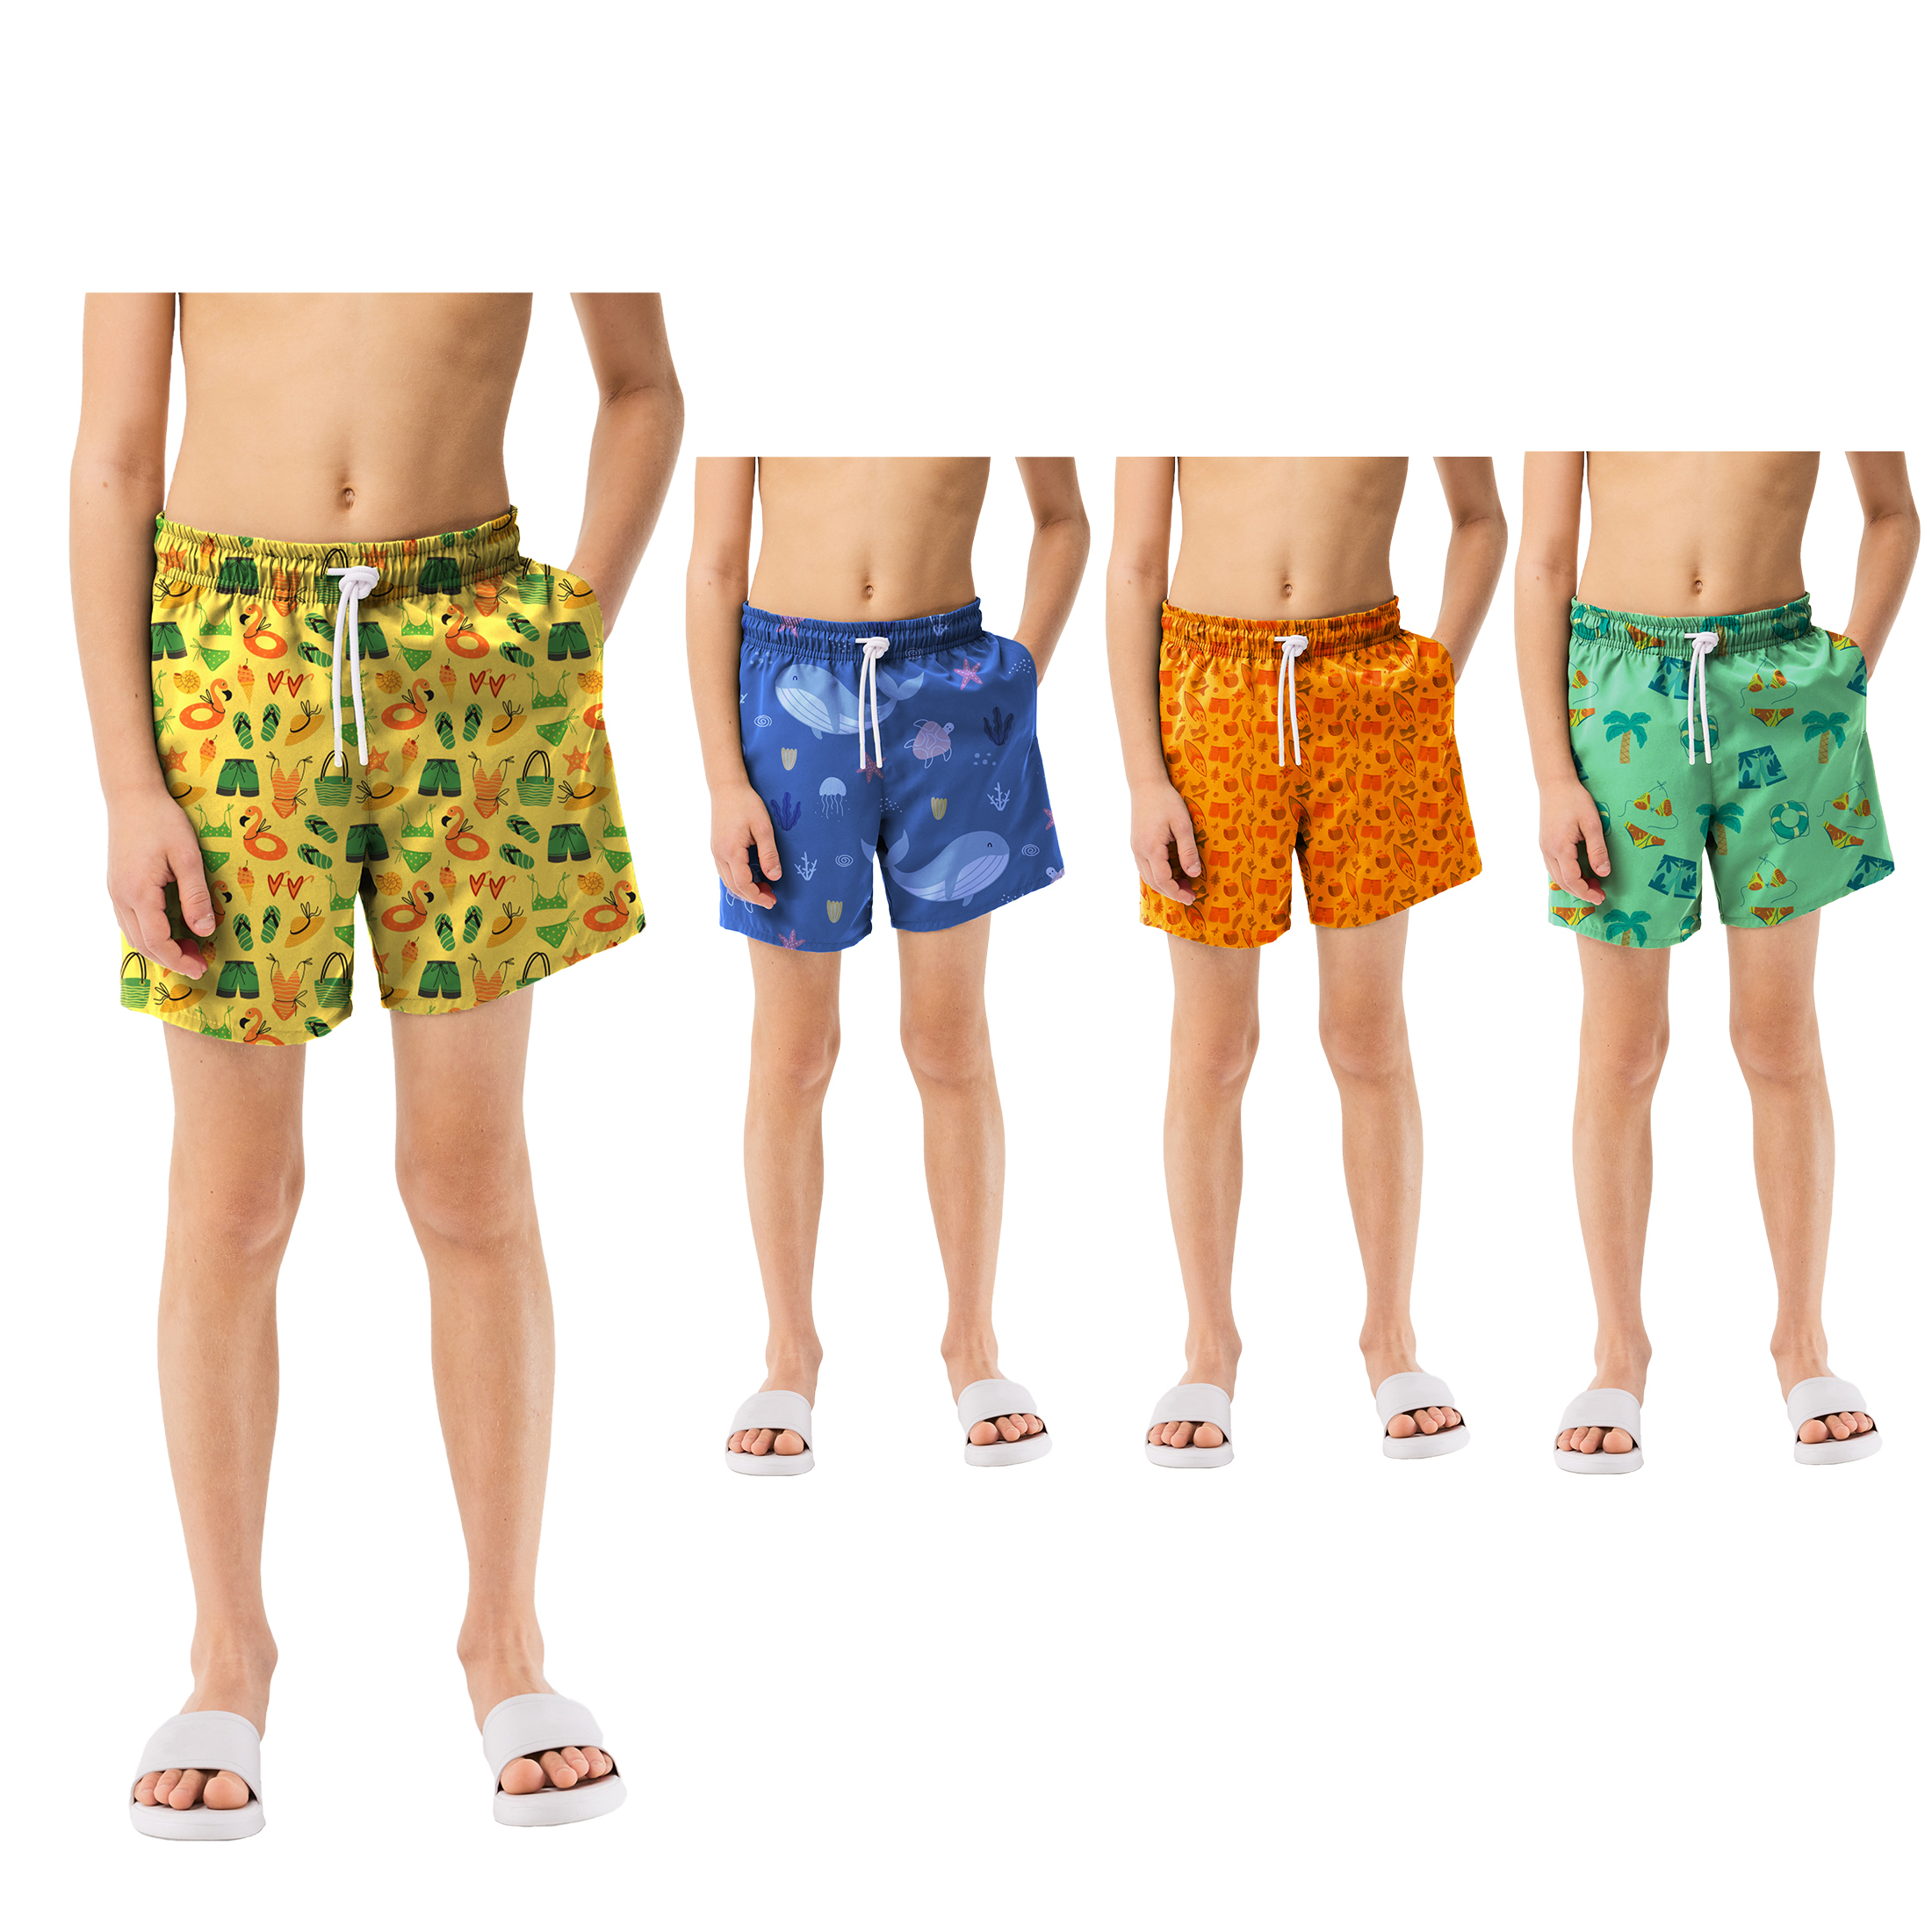 4-Pack Boy's Beach Summer Swim Trunk Shorts Printed Bathing Quick Dry UPF 50+ Comfy Swimsuit - L